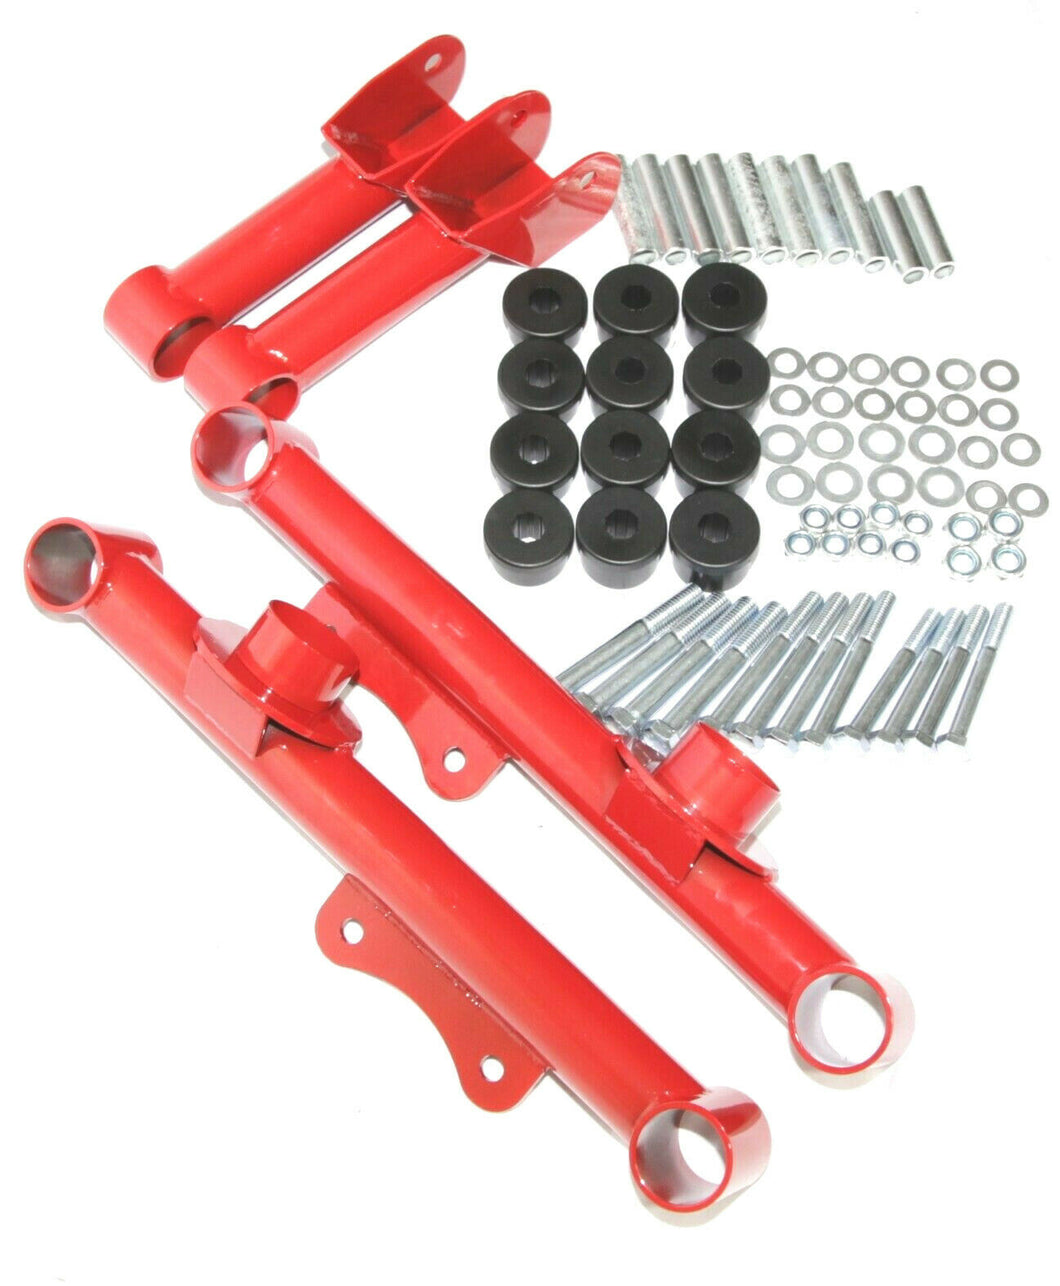 Racing Rear Upper + Lower Tubular Control Arms fit 79-04 Ford Mustang GT LX Red